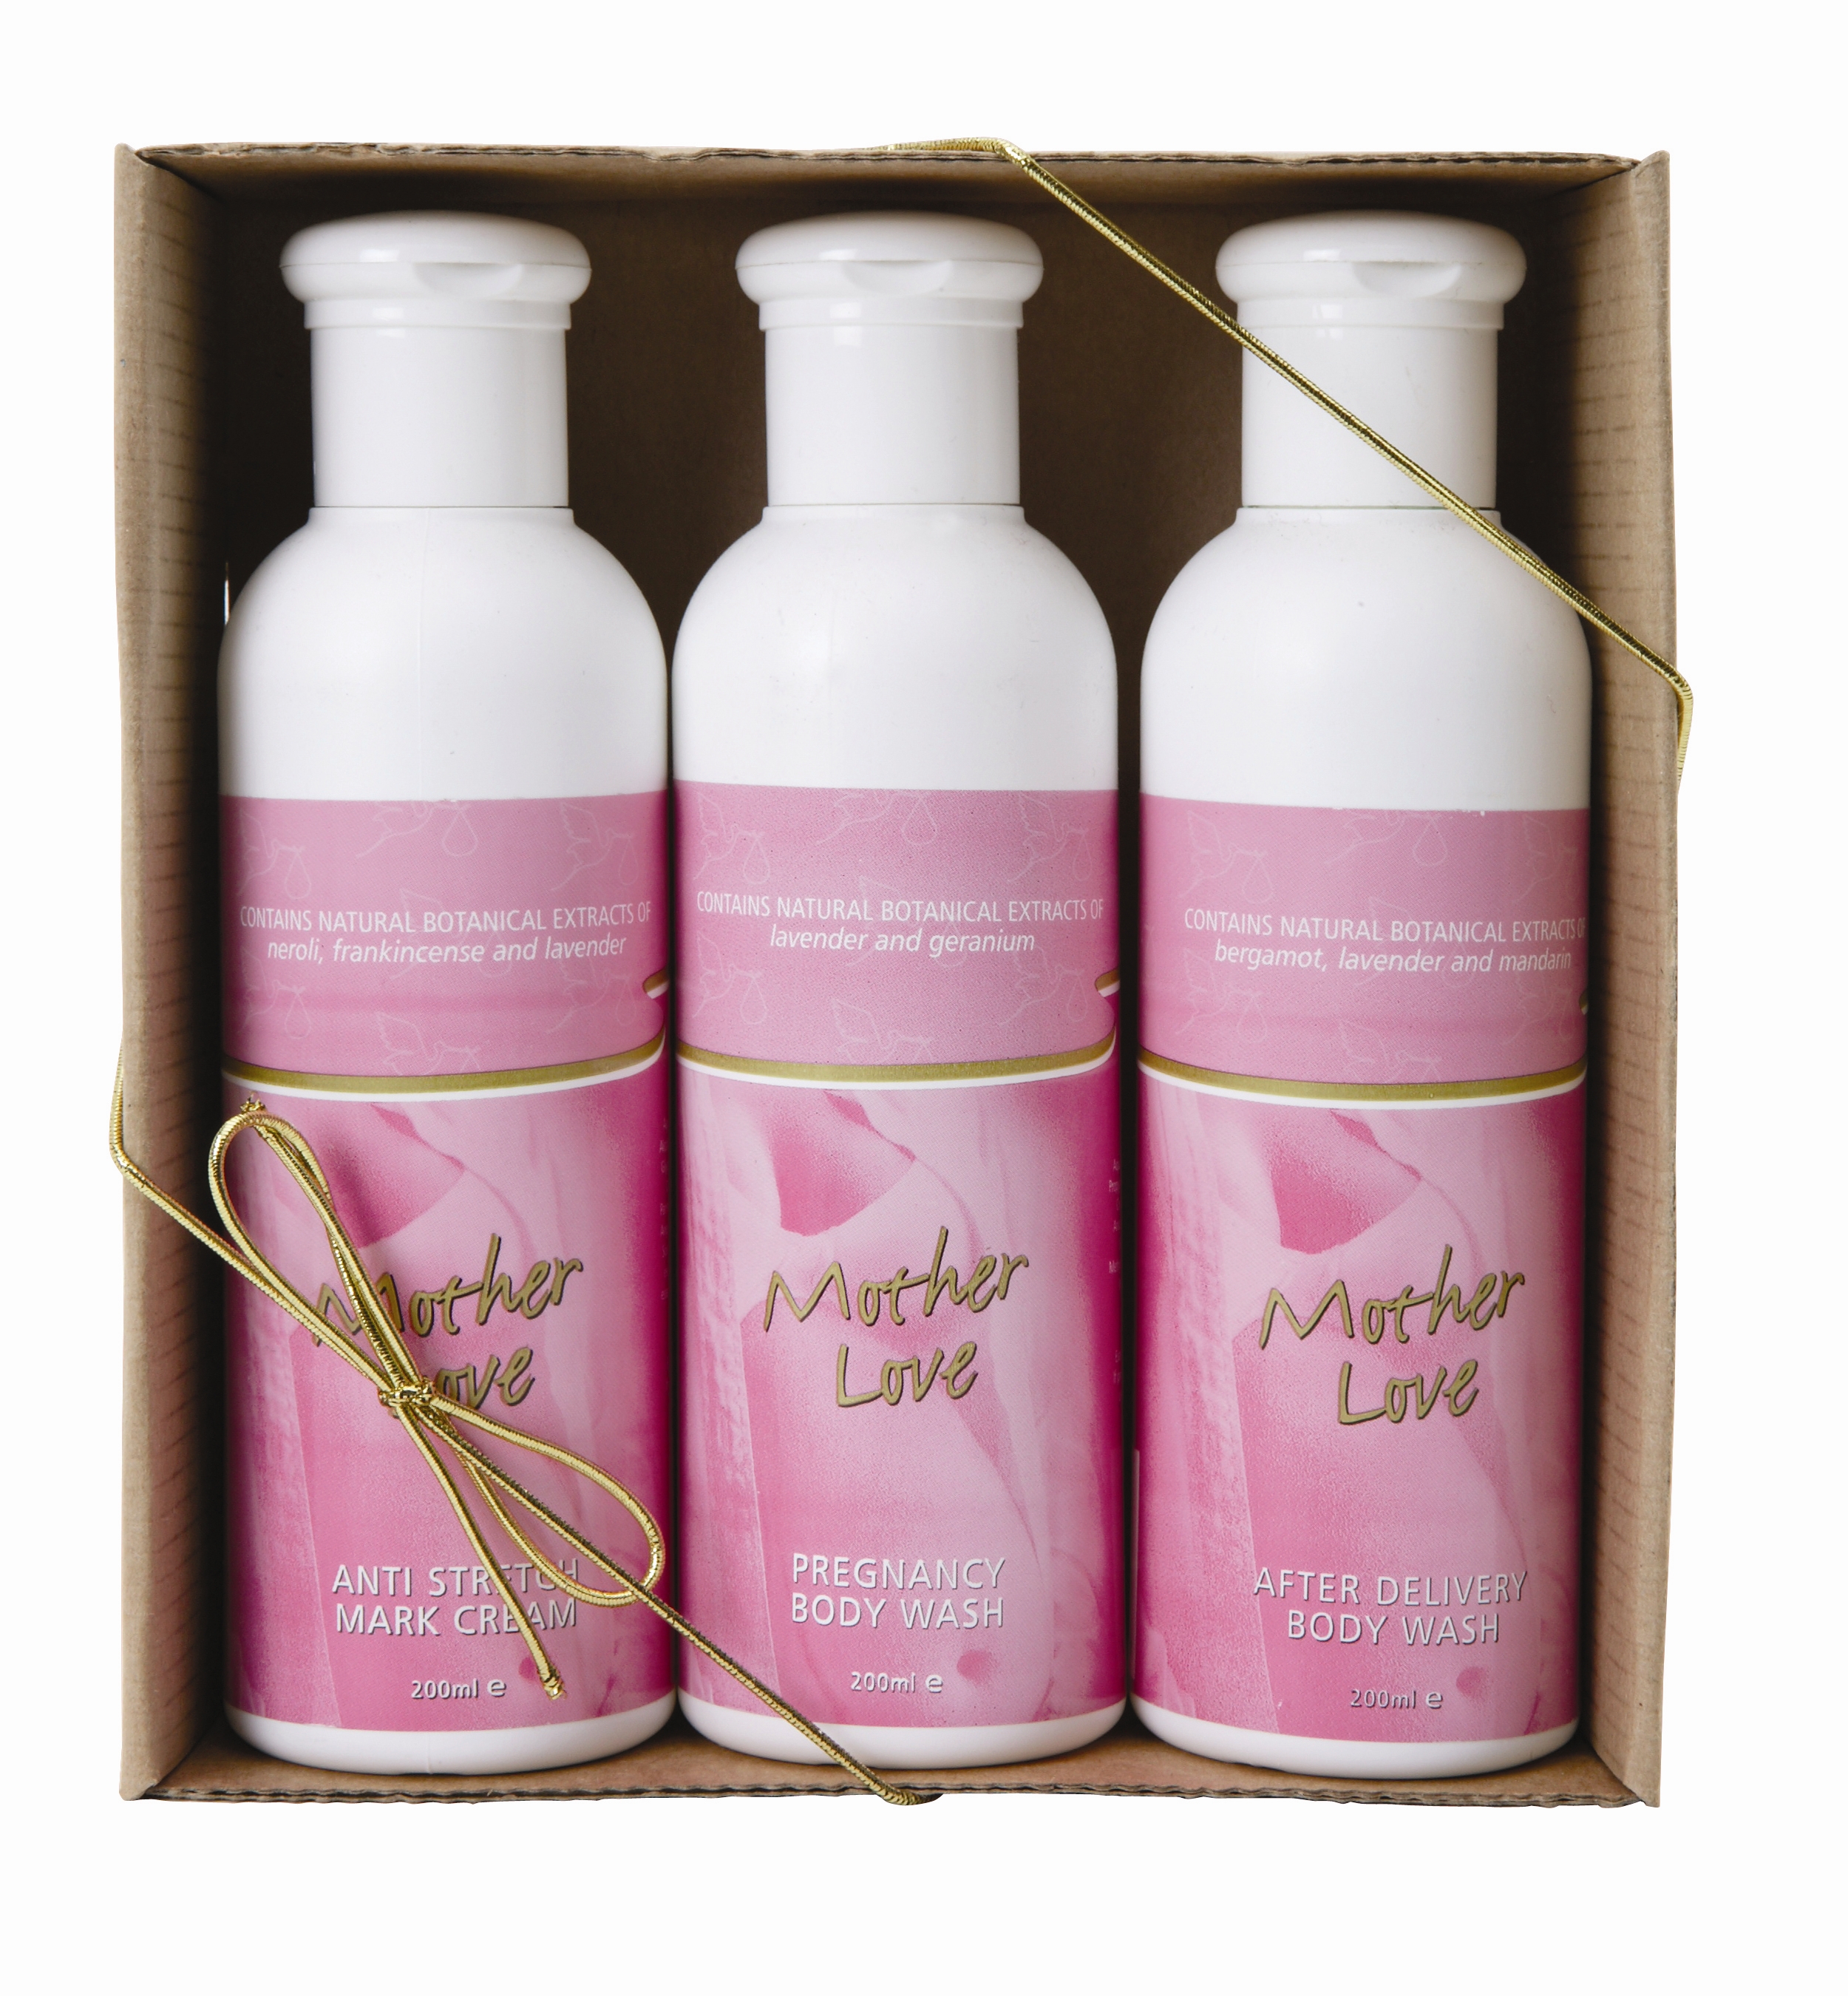 Three bottles of Pregnancy Body wash bottle, nicely packed